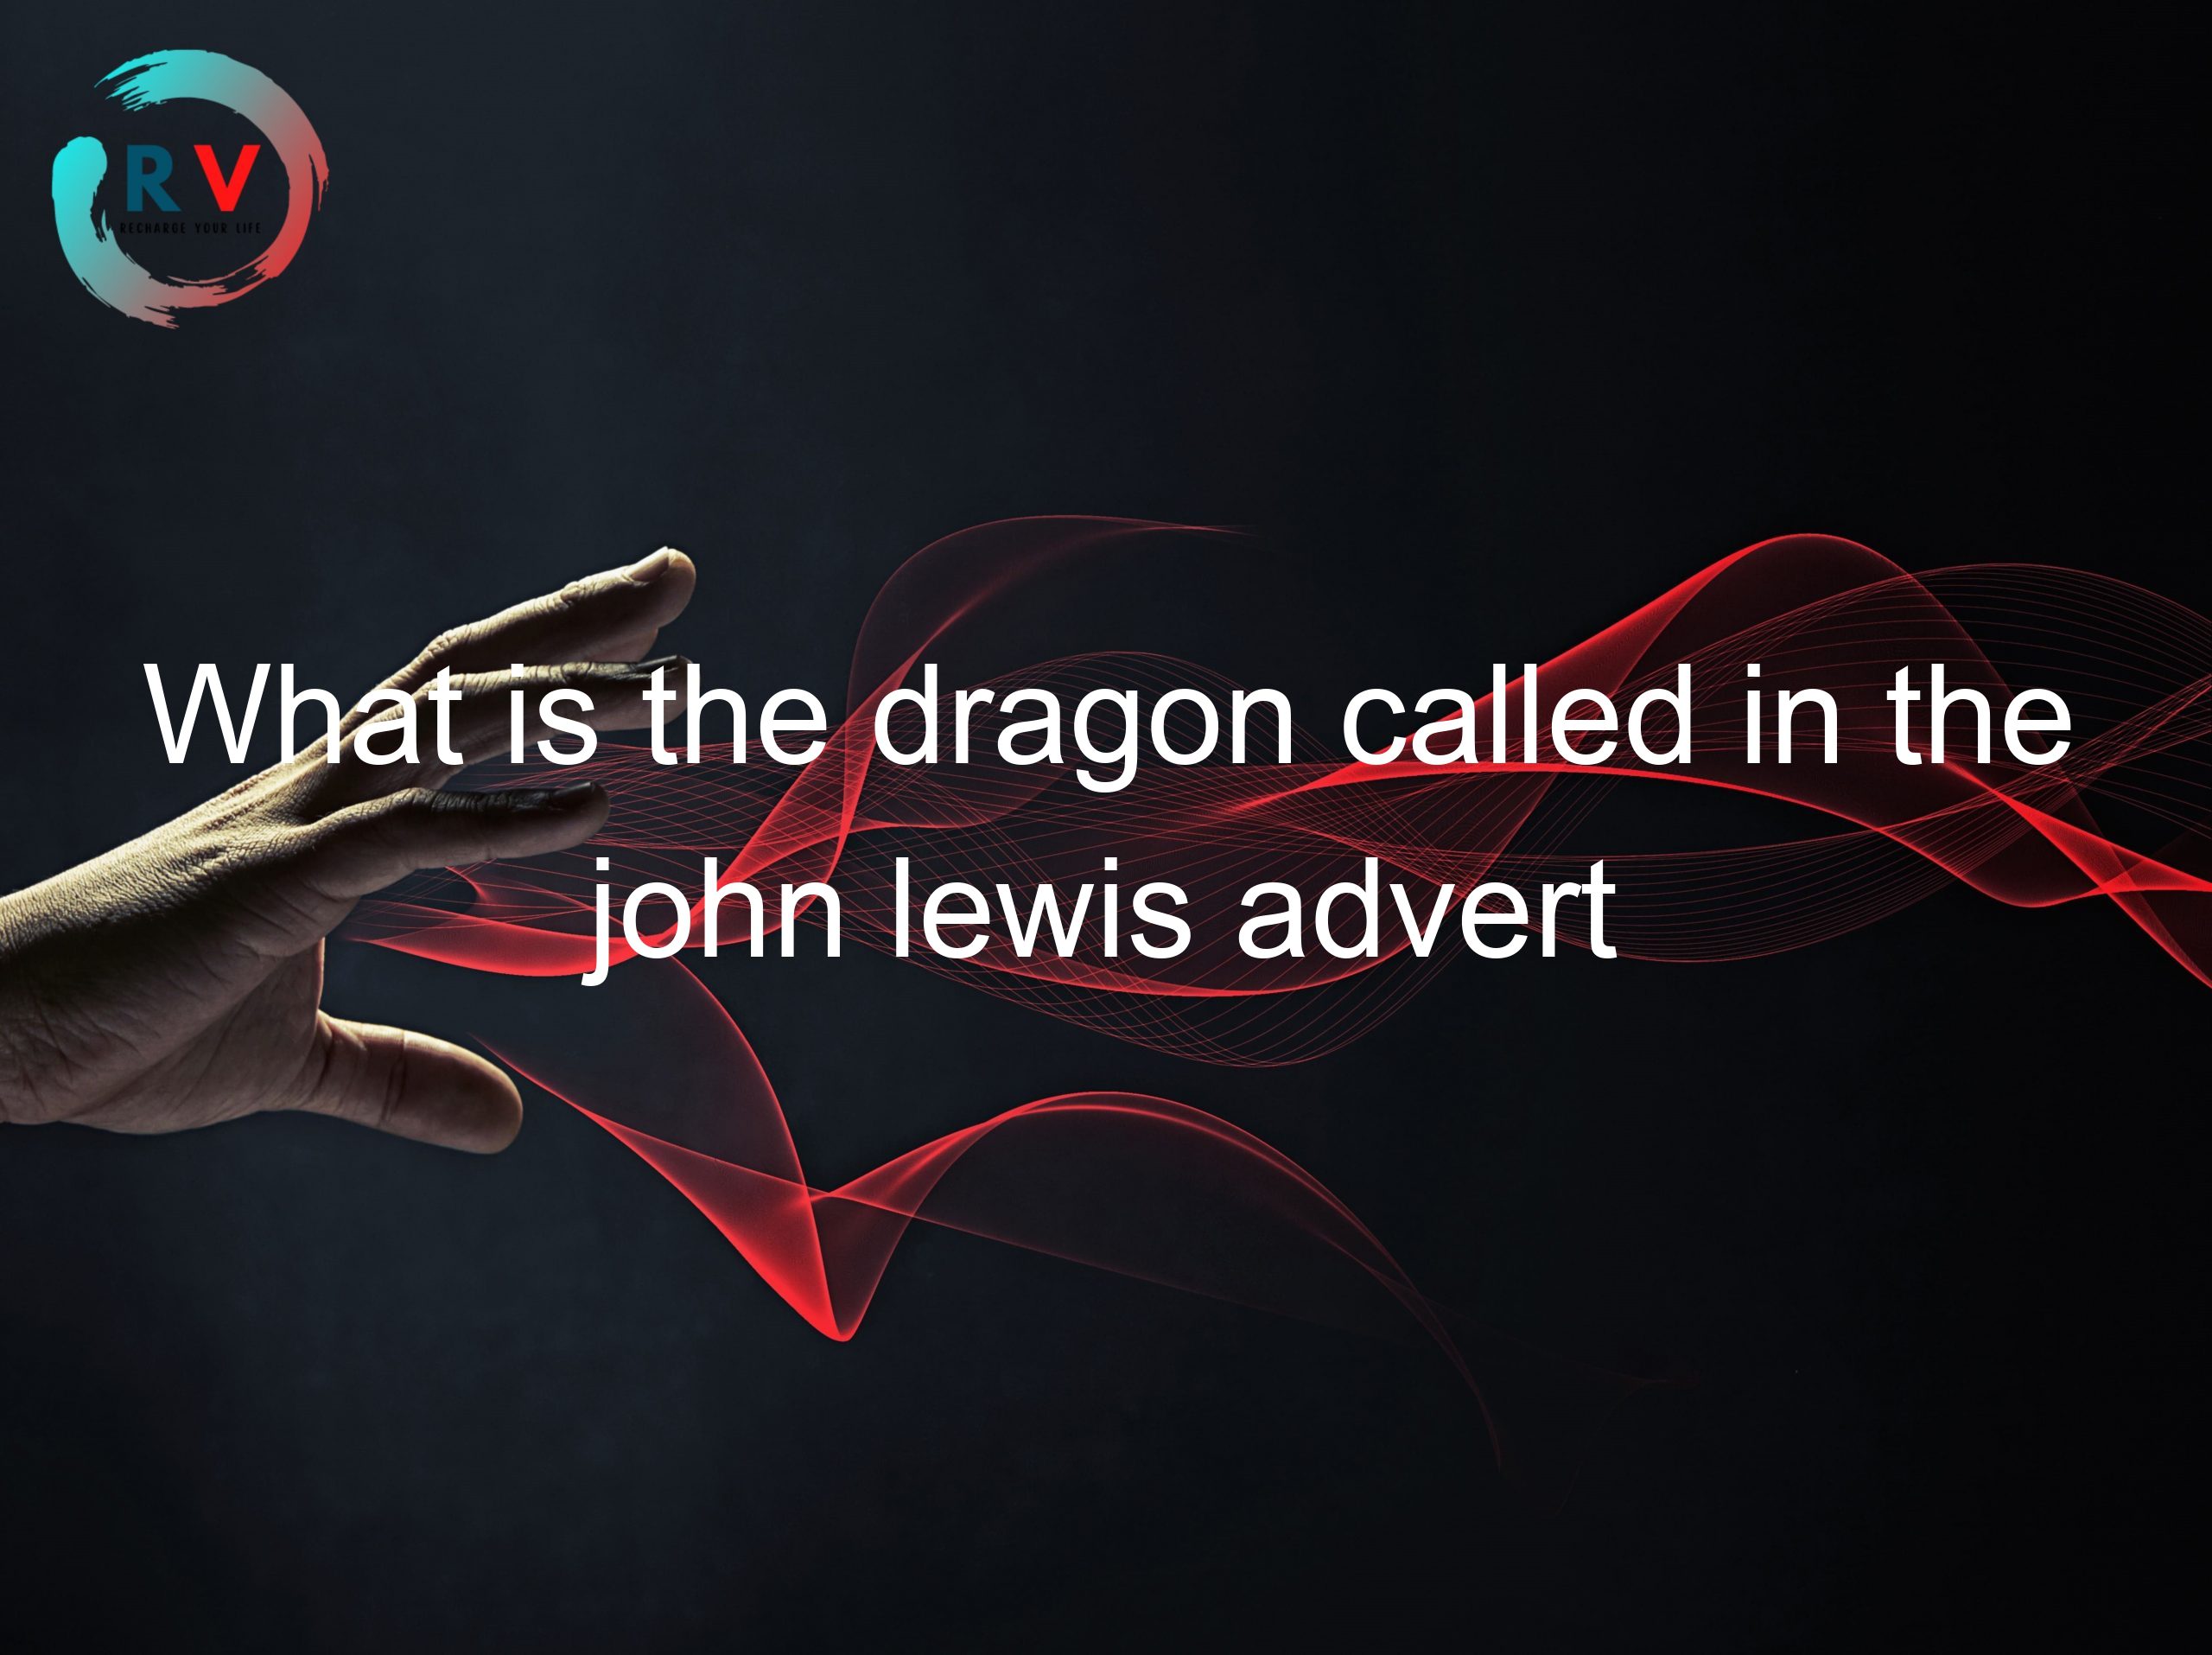 What is the dragon called in the john lewis advert